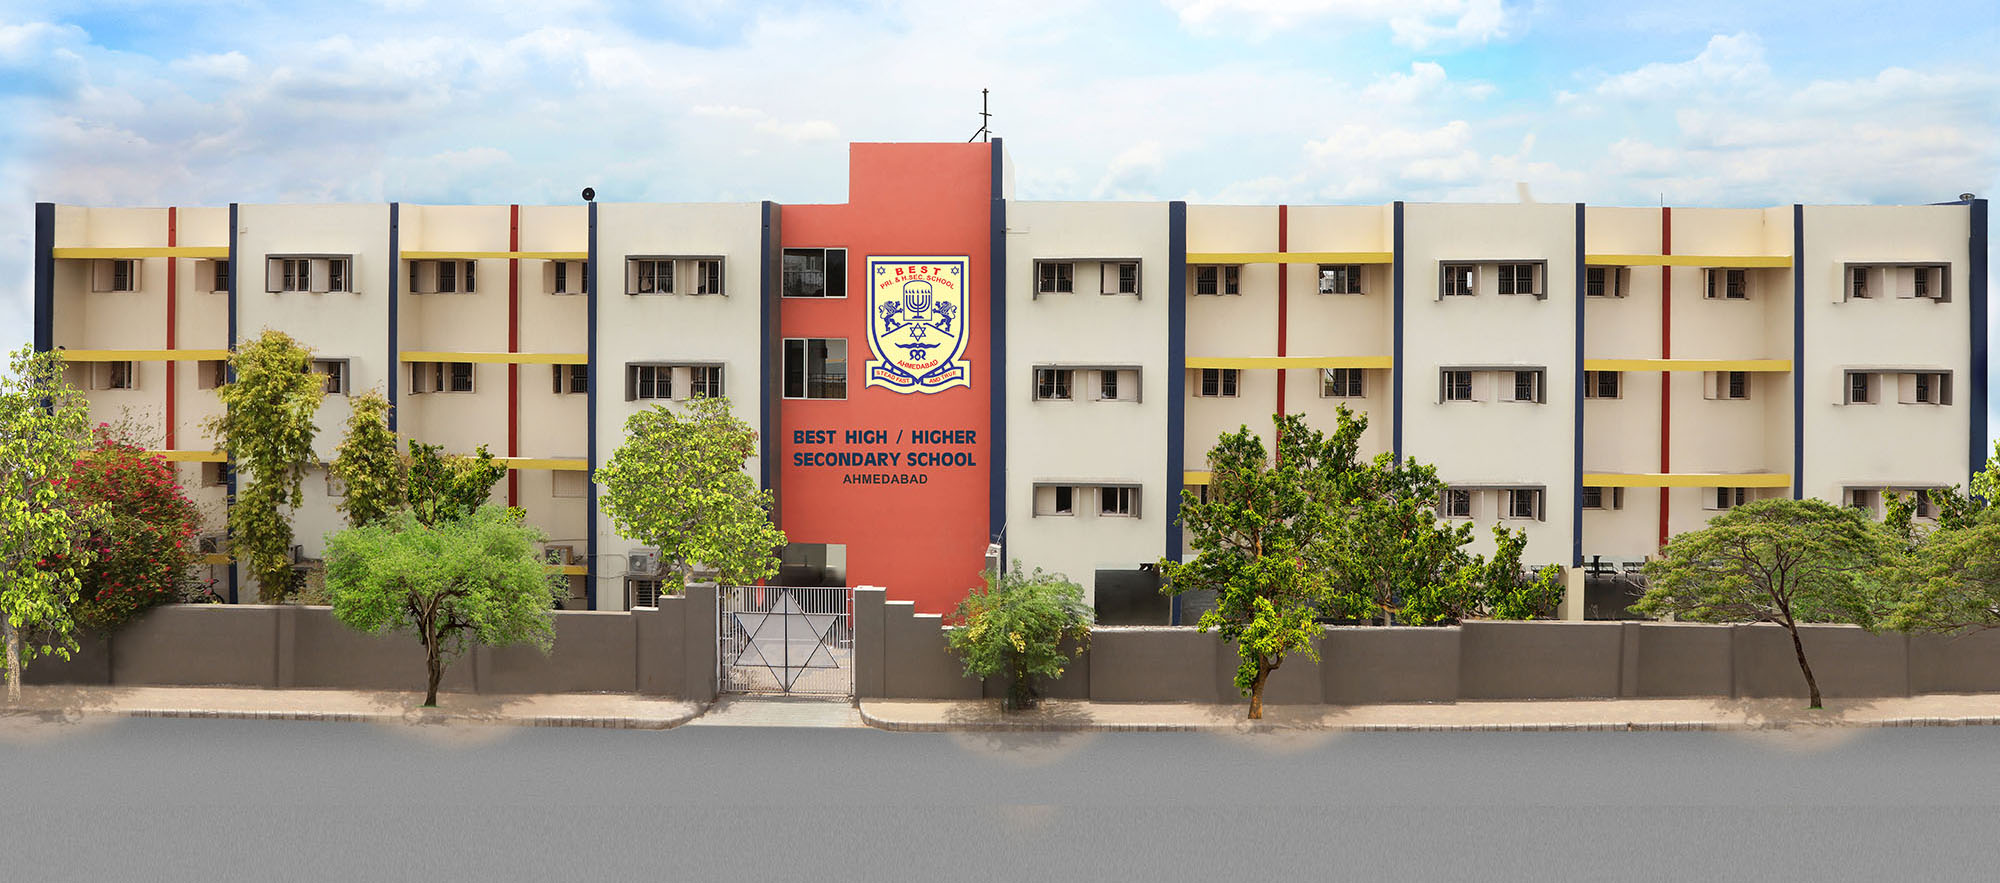 Best High School, Ahmedabad - Admissions, Fee Structure, Facilities